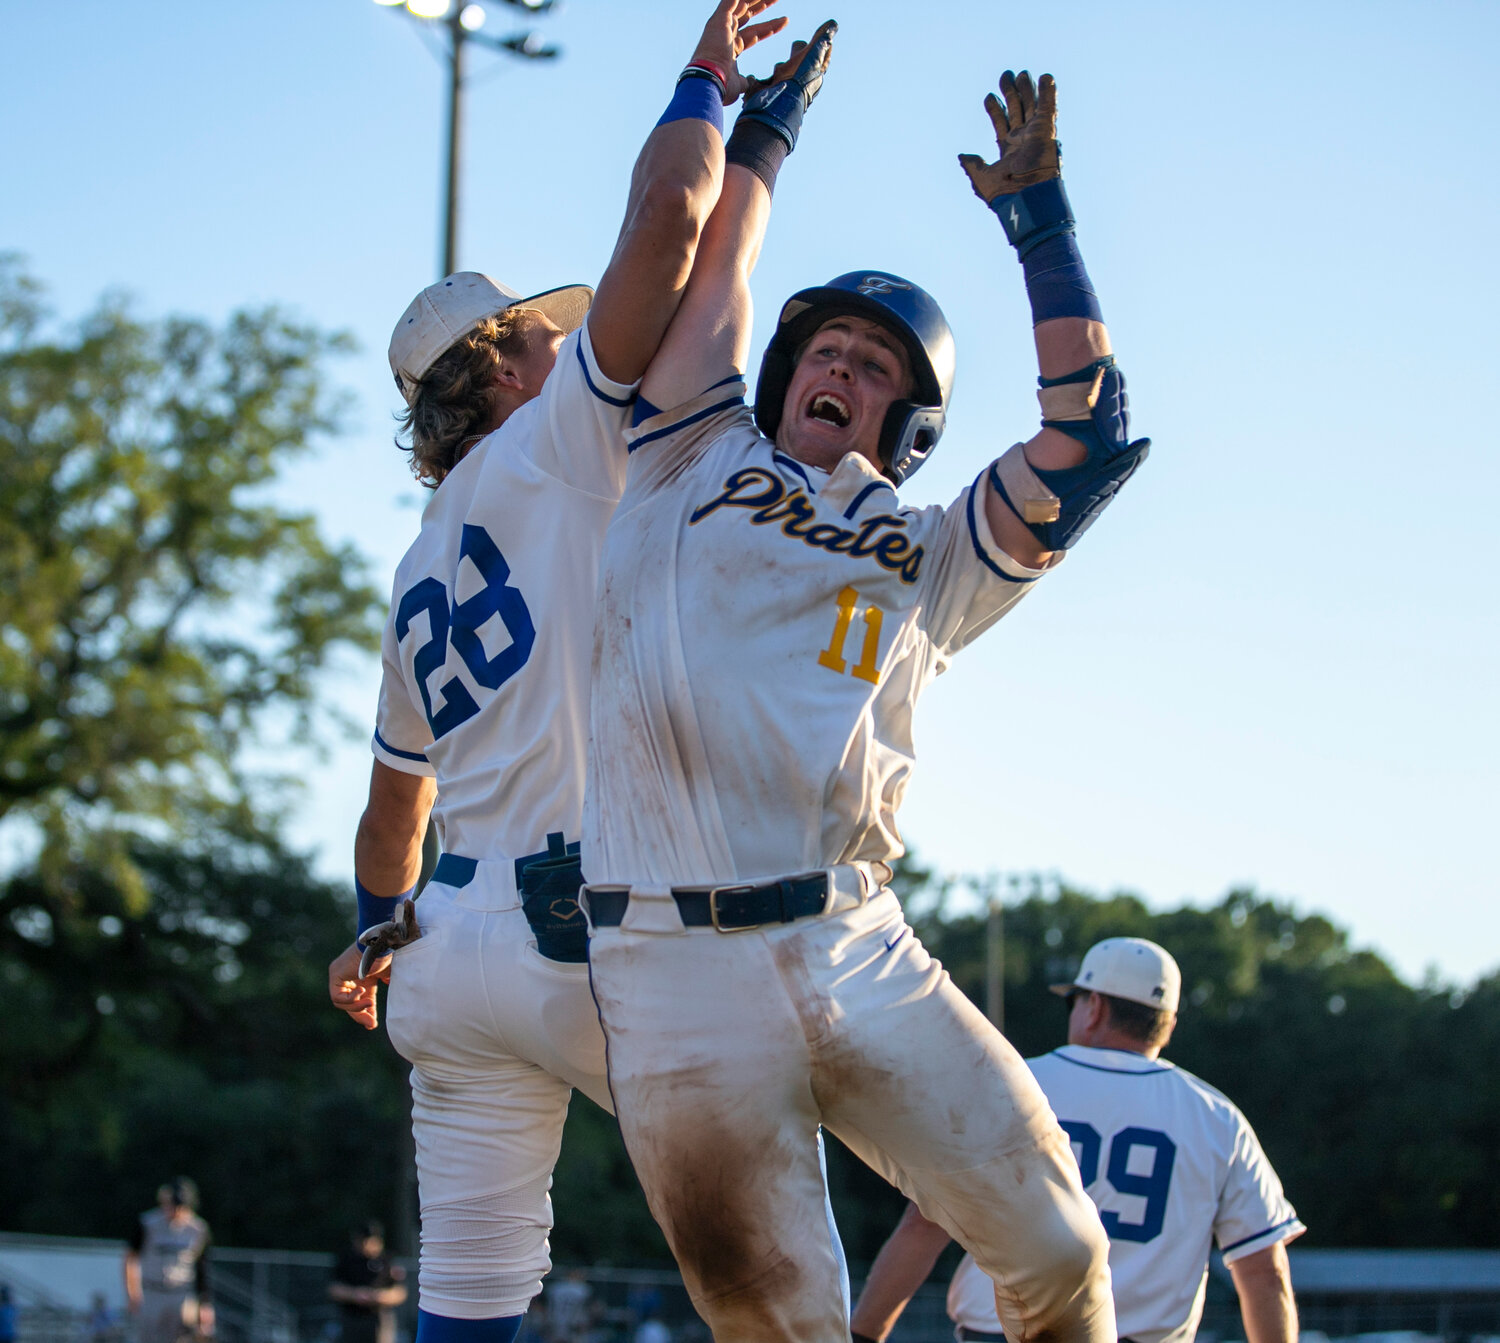 Hollon Brock and Caden Creel celebrate Brock’s two-RBI double that tied Game 1 of the Class 7A first-round state playoff series between Fairhope and Smiths Station Friday, April 28, at Volanta Park.